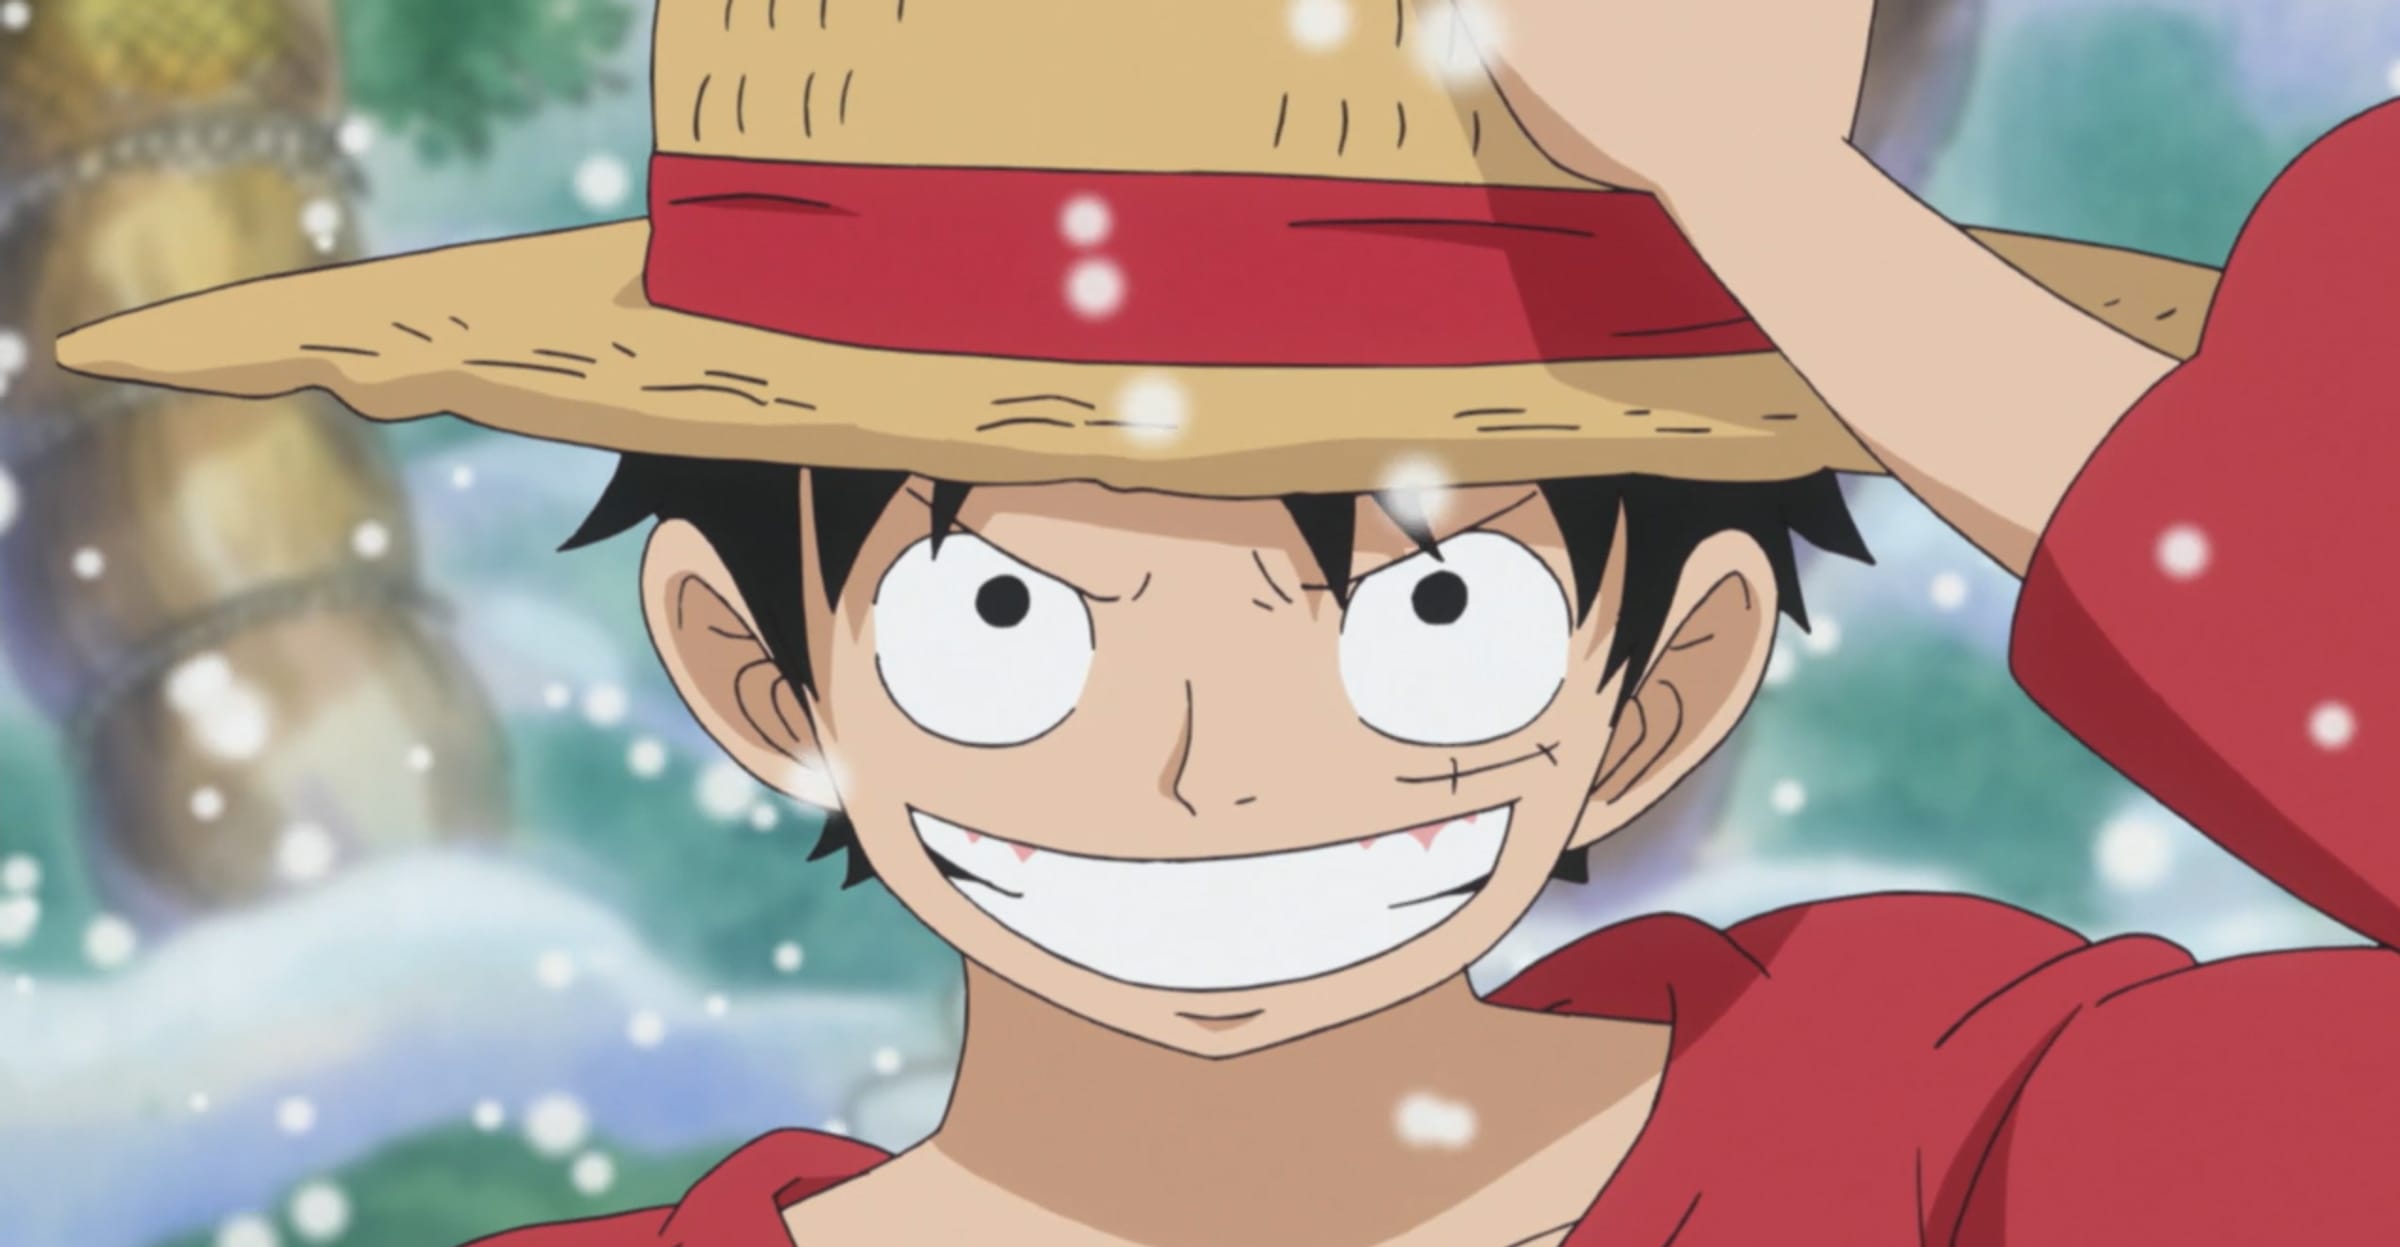 10 Naruto Characters One Piece's Luffy Would Team Up With